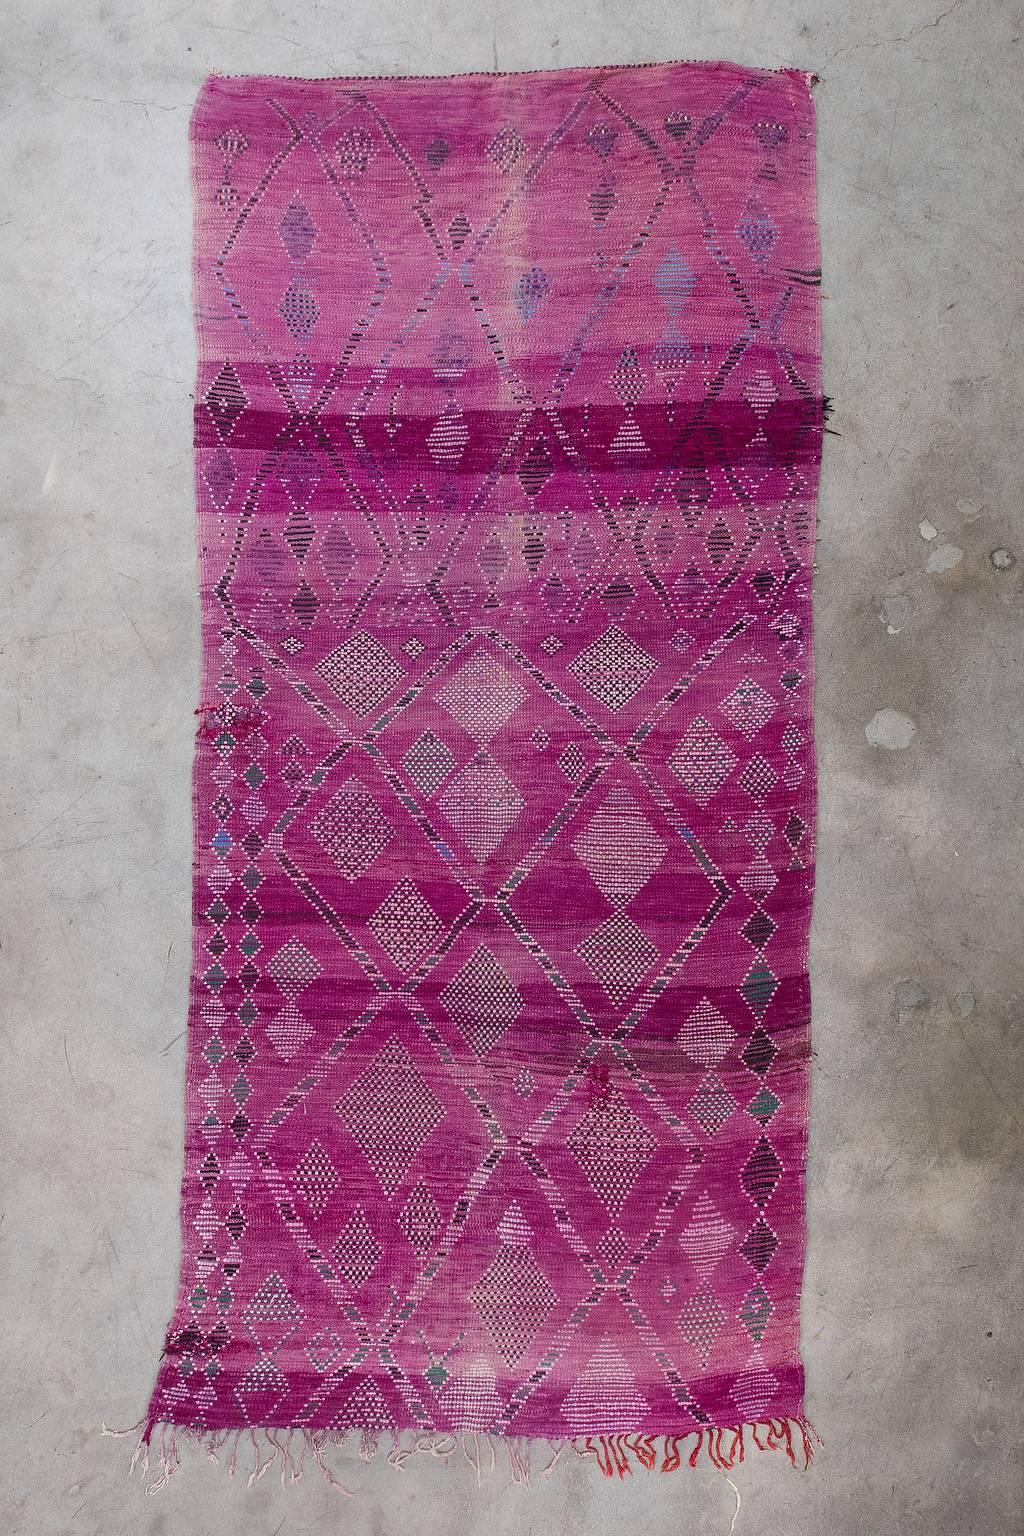 Originating from Khouribga in the Middle Atlas region of Morocco, Boujad rugs are low-pile and known for their abstract and geometric shapes. This artistic piece has a mauve base with abundant pink, black, green and blue diamonds.

Measurement